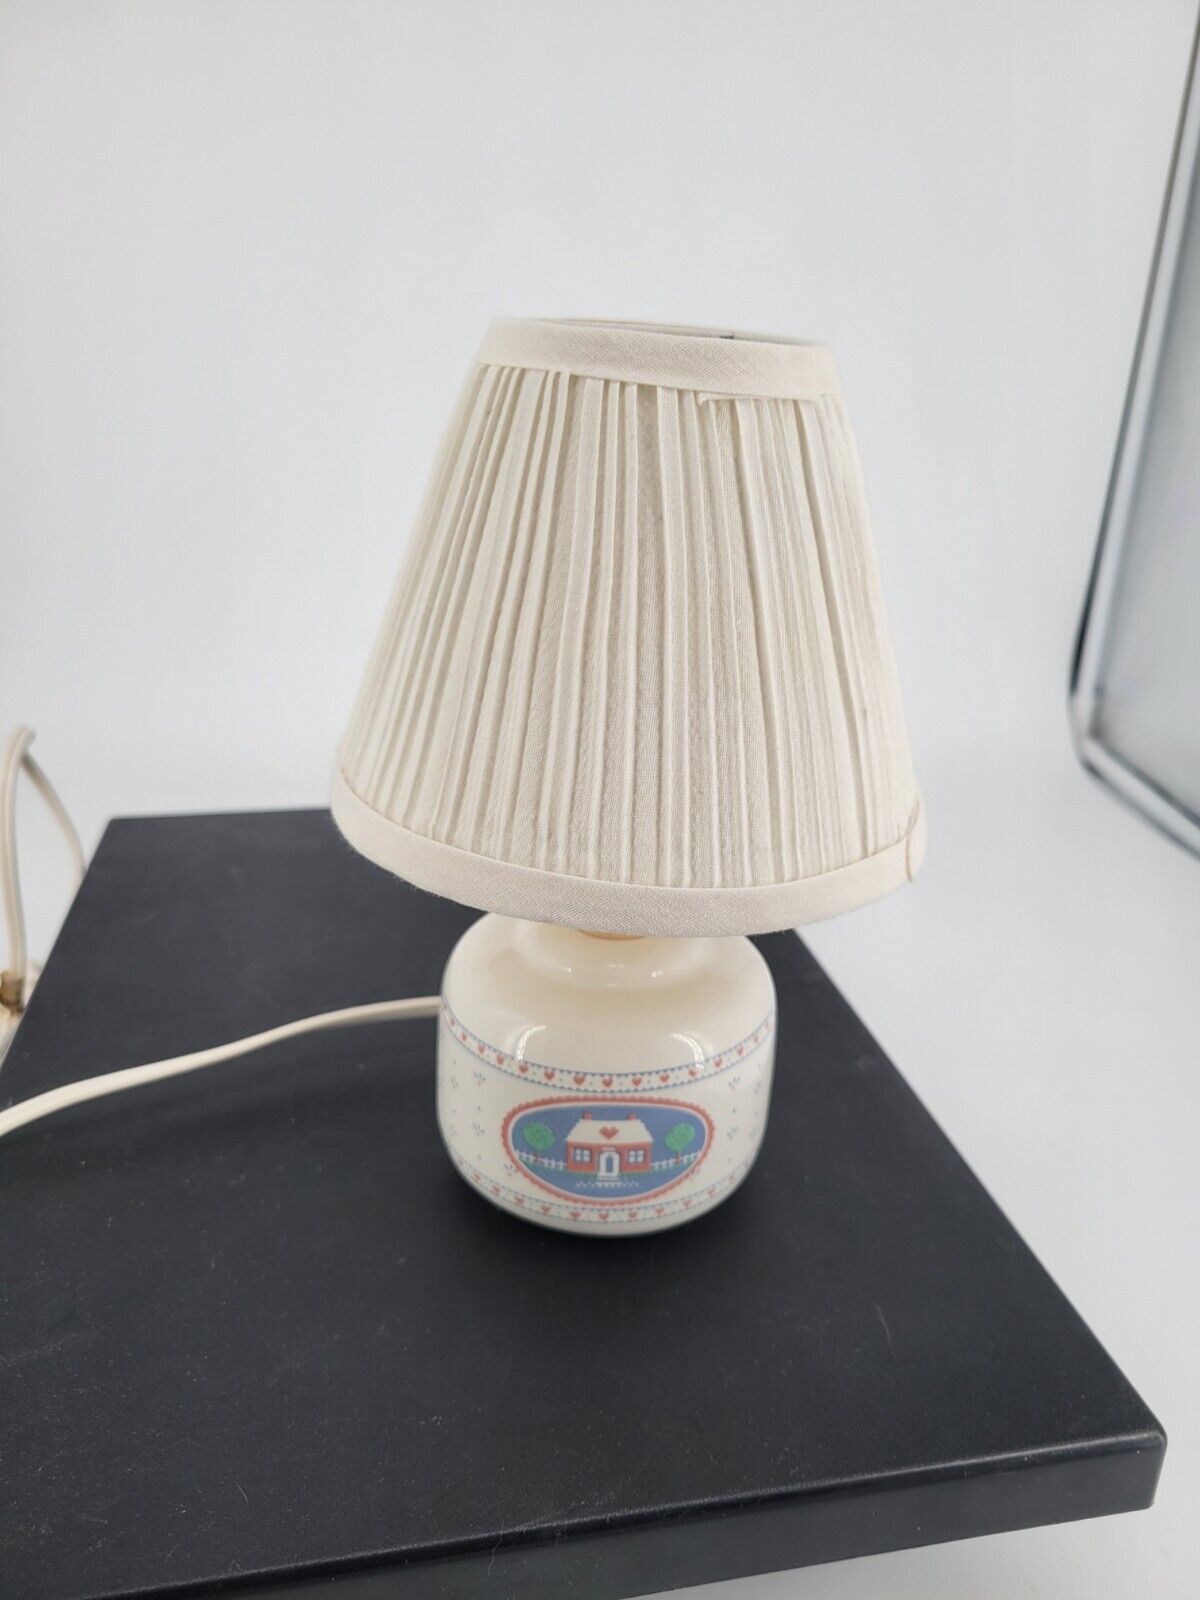 Mini Country Style Cottage Table Lamp W/Shade & C7 Bulb Works As Is 1989 Nov.